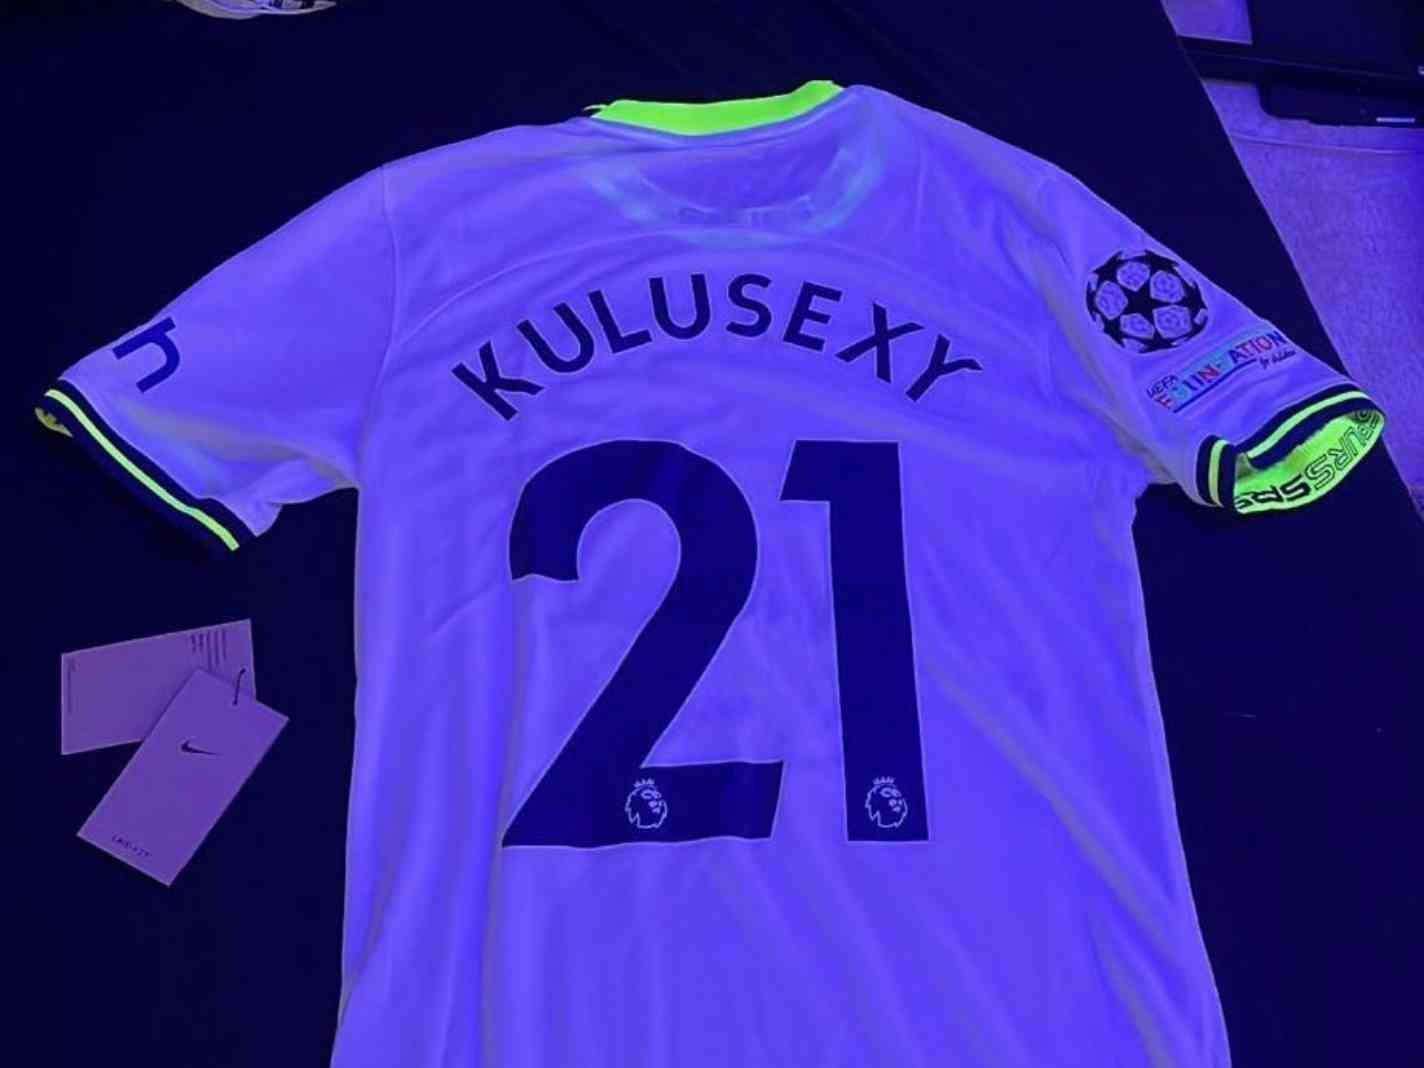 Why you might start seeing Tottenham Hotspur kits with ‘Kulusexy’ all over